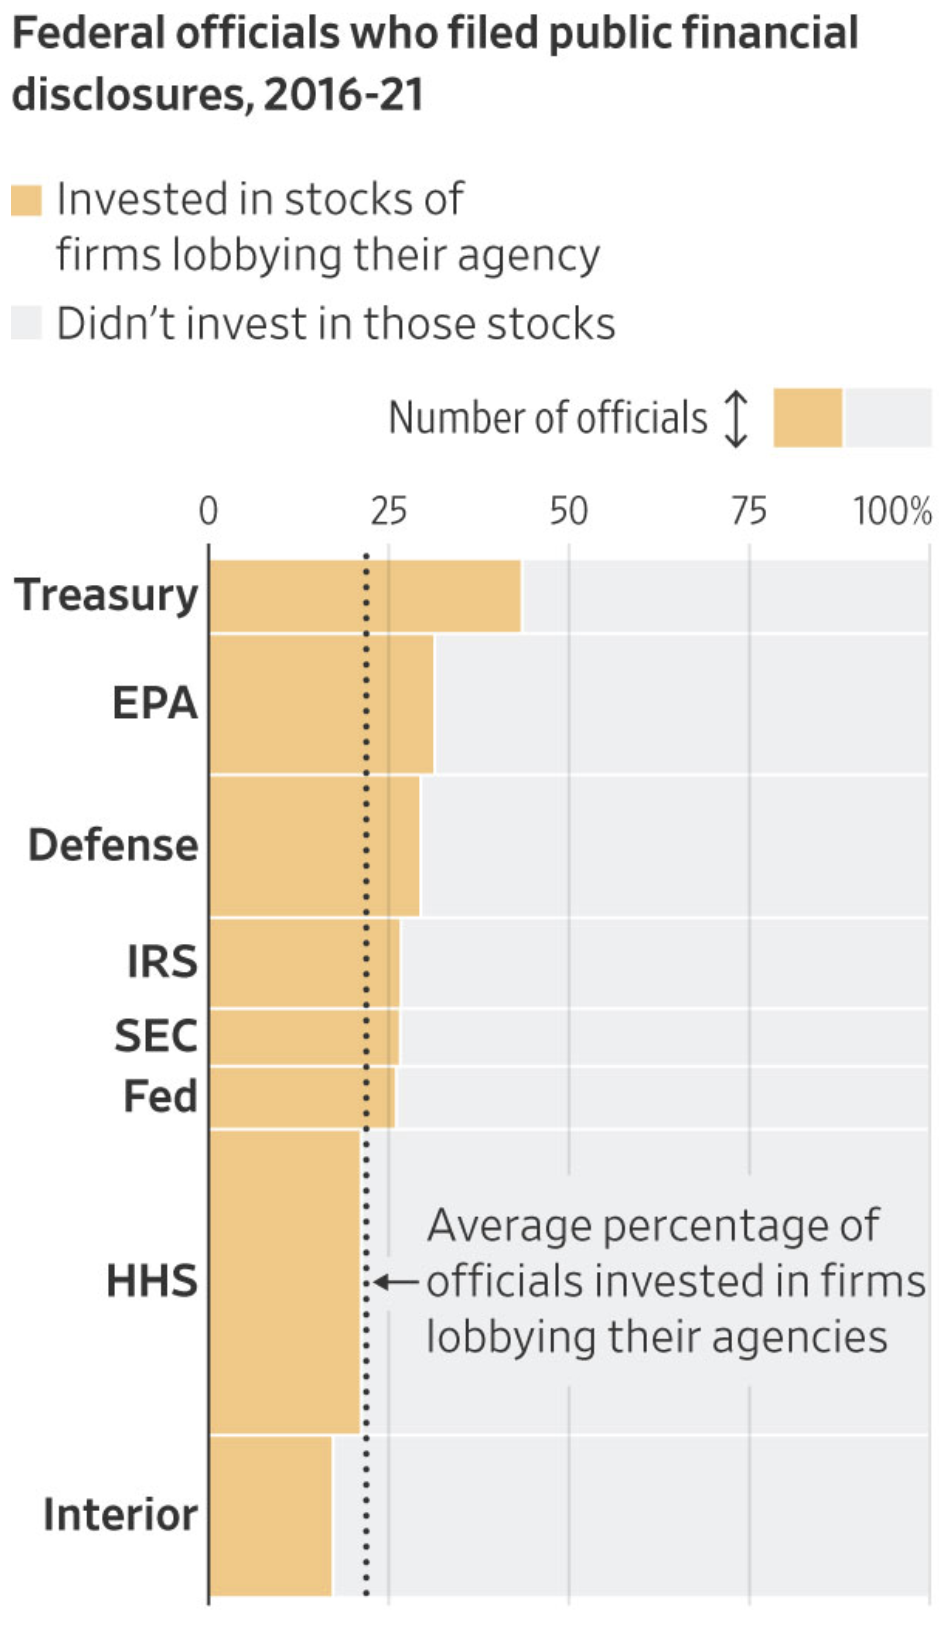 SEC employees invested in firms lobbying their agency, 2016-2021